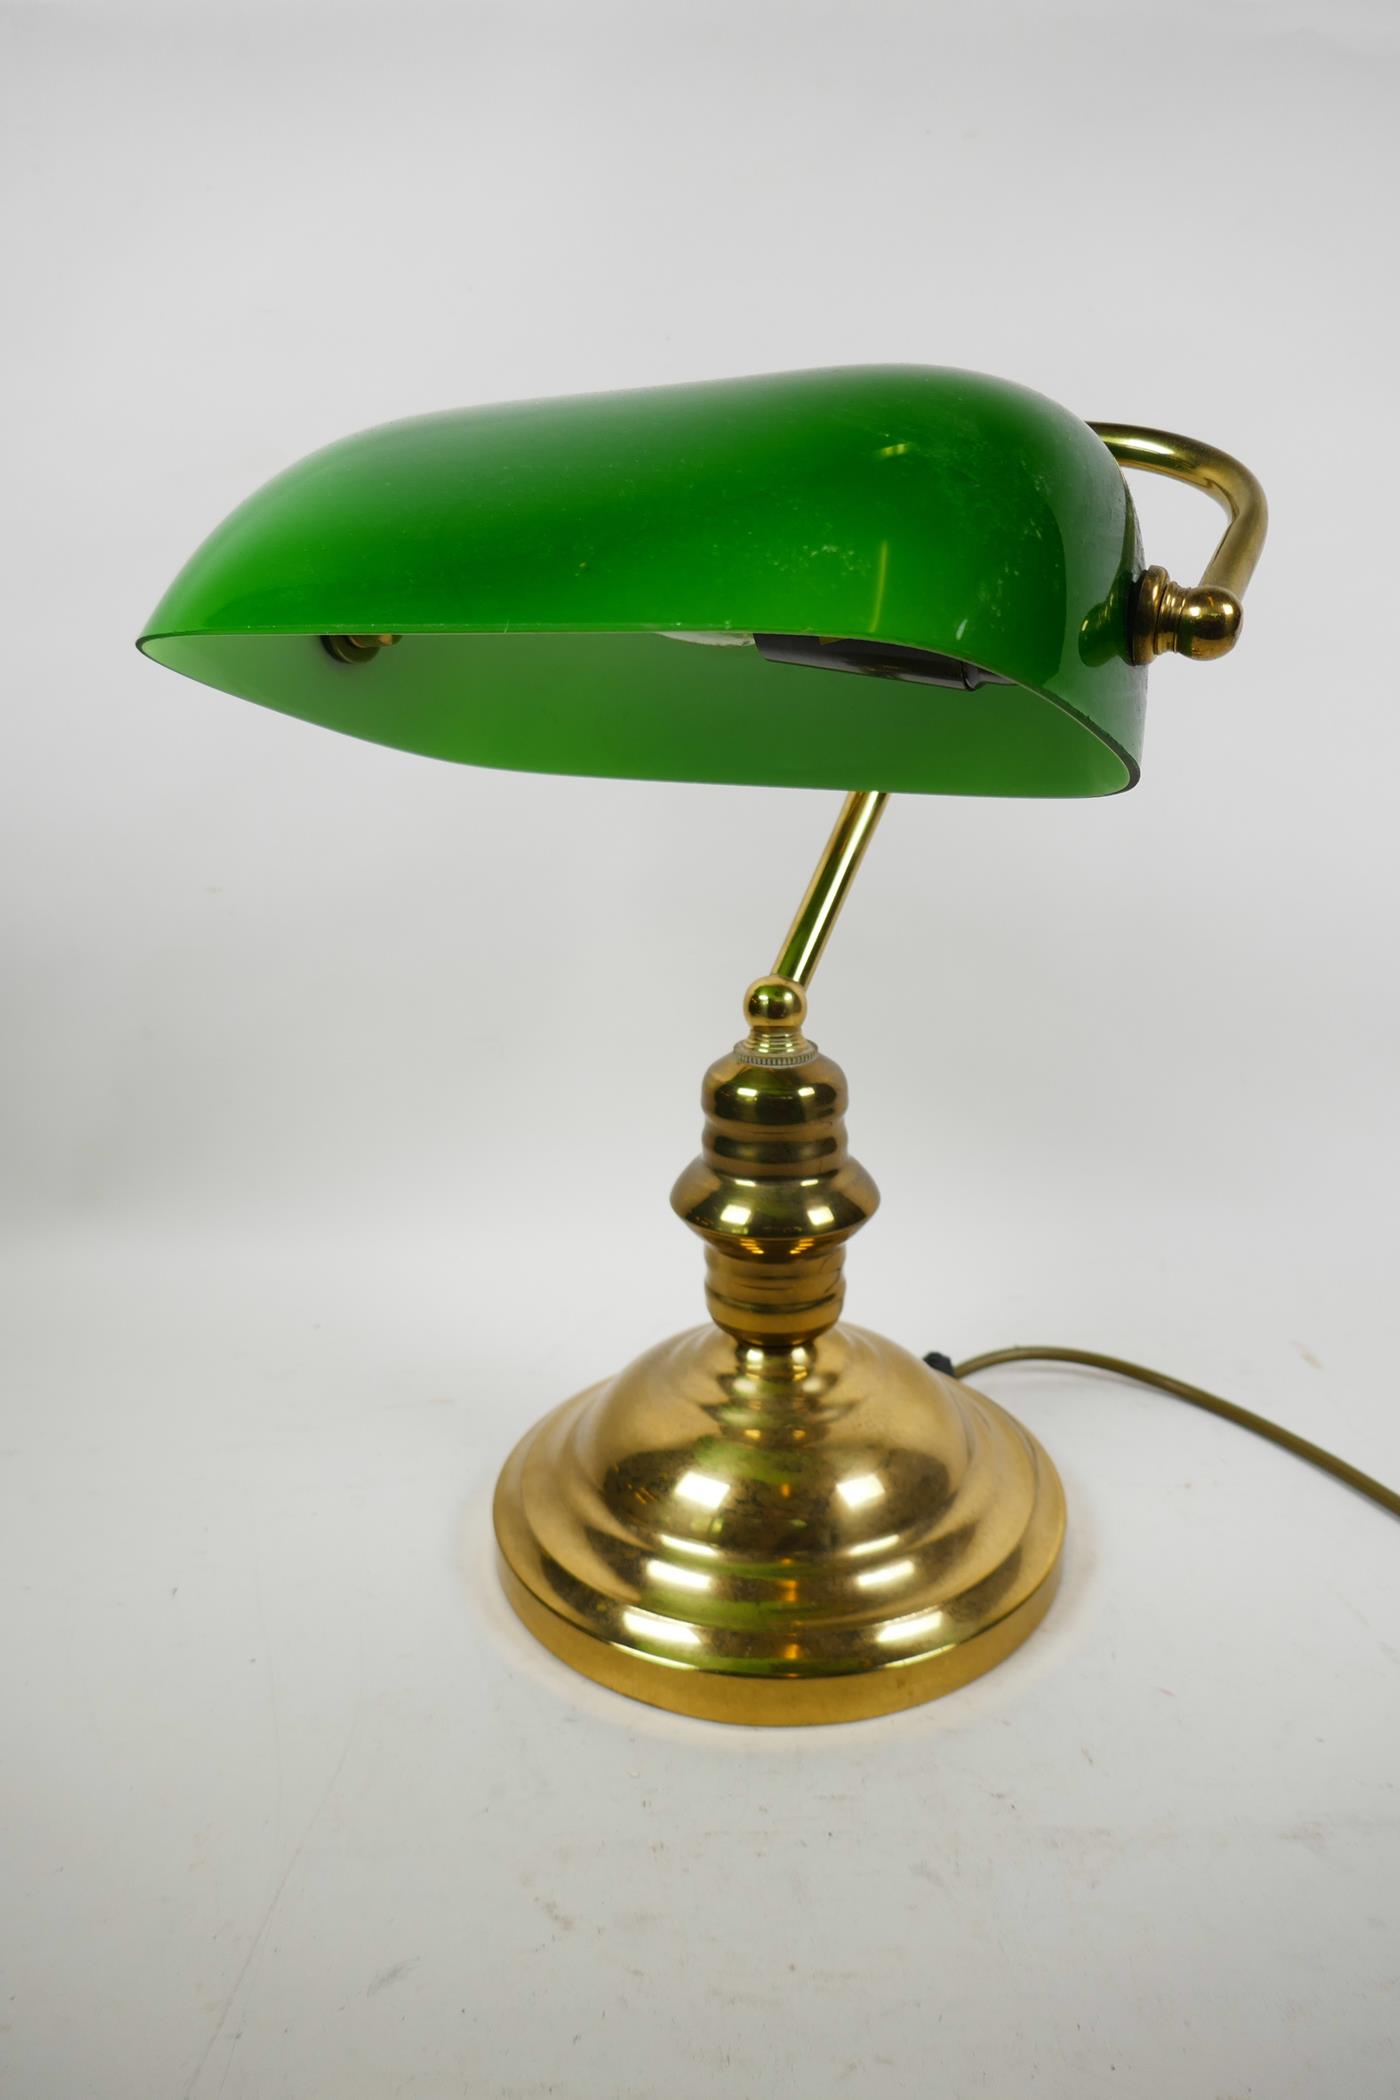 A brass desk lamp with adjustable green glass shade, 13" high